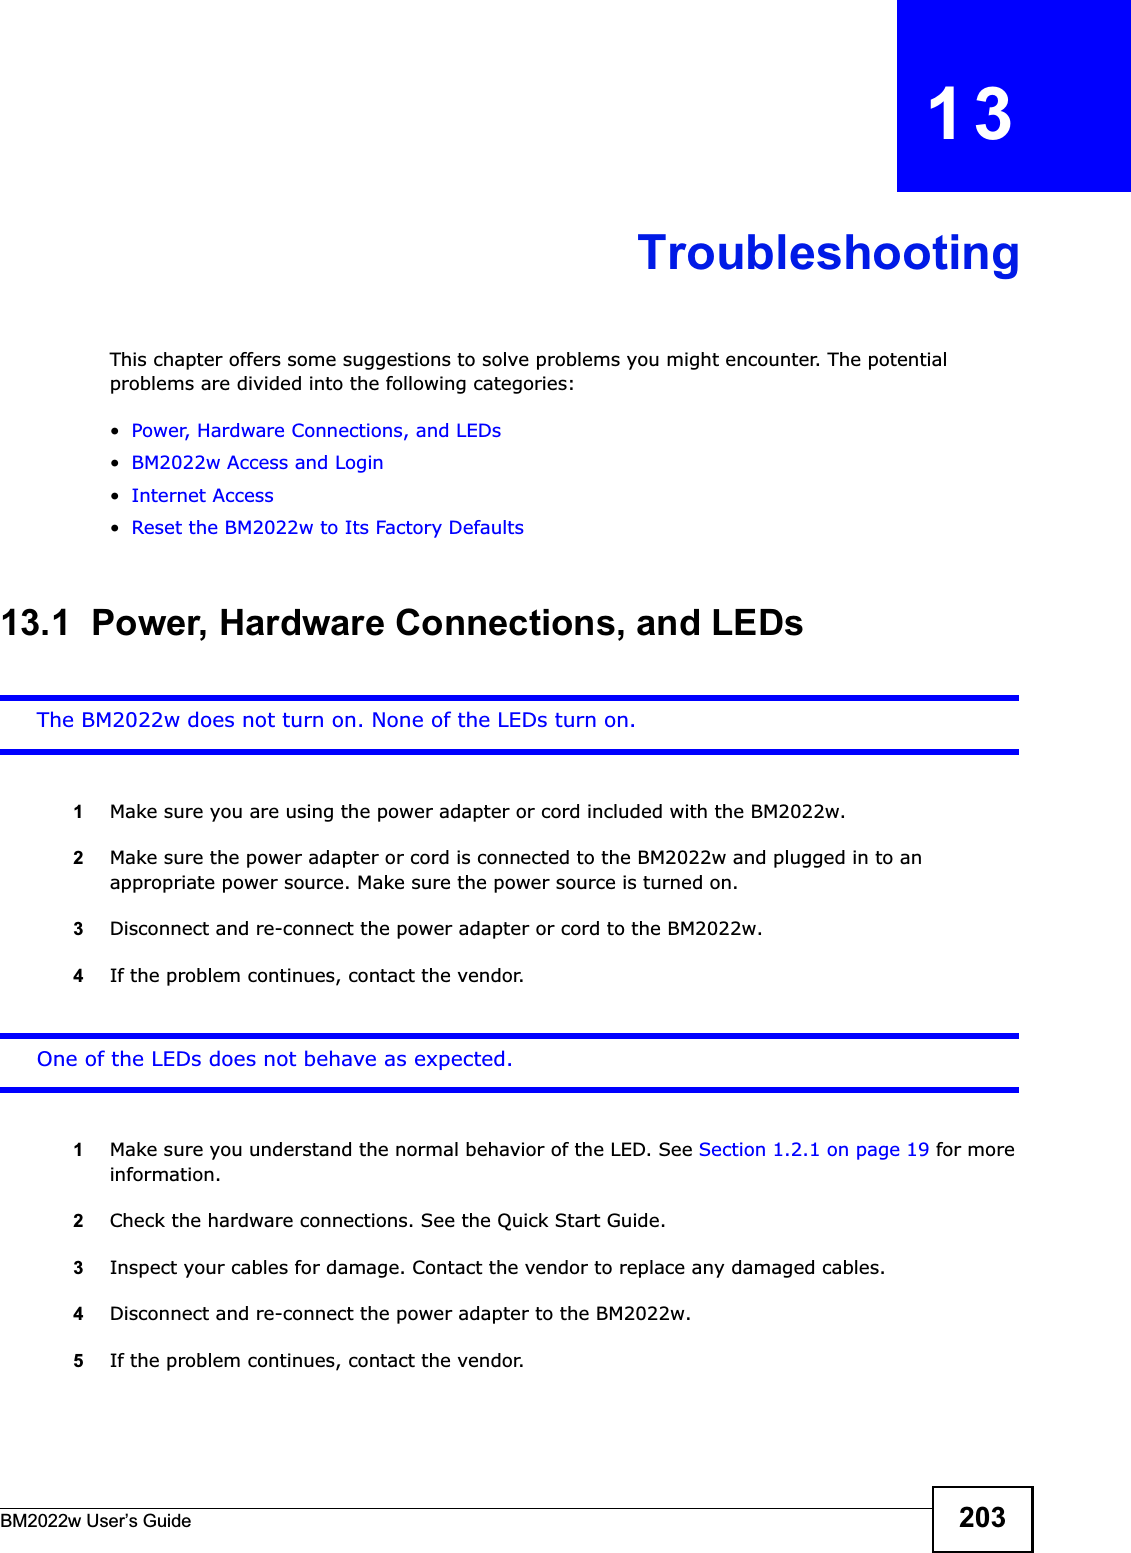 BM2022w User’s Guide 203CHAPTER   13TroubleshootingThis chapter offers some suggestions to solve problems you might encounter. The potential problems are divided into the following categories:•Power, Hardware Connections, and LEDs•BM2022w Access and Login•Internet Access•Reset the BM2022w to Its Factory Defaults13.1  Power, Hardware Connections, and LEDsThe BM2022w does not turn on. None of the LEDs turn on.1Make sure you are using the power adapter or cord included with the BM2022w.2Make sure the power adapter or cord is connected to the BM2022w and plugged in to an appropriate power source. Make sure the power source is turned on.3Disconnect and re-connect the power adapter or cord to the BM2022w.4If the problem continues, contact the vendor.One of the LEDs does not behave as expected.1Make sure you understand the normal behavior of the LED. See Section 1.2.1 on page 19 for more information.2Check the hardware connections. See the Quick Start Guide.3Inspect your cables for damage. Contact the vendor to replace any damaged cables.4Disconnect and re-connect the power adapter to the BM2022w.5If the problem continues, contact the vendor.